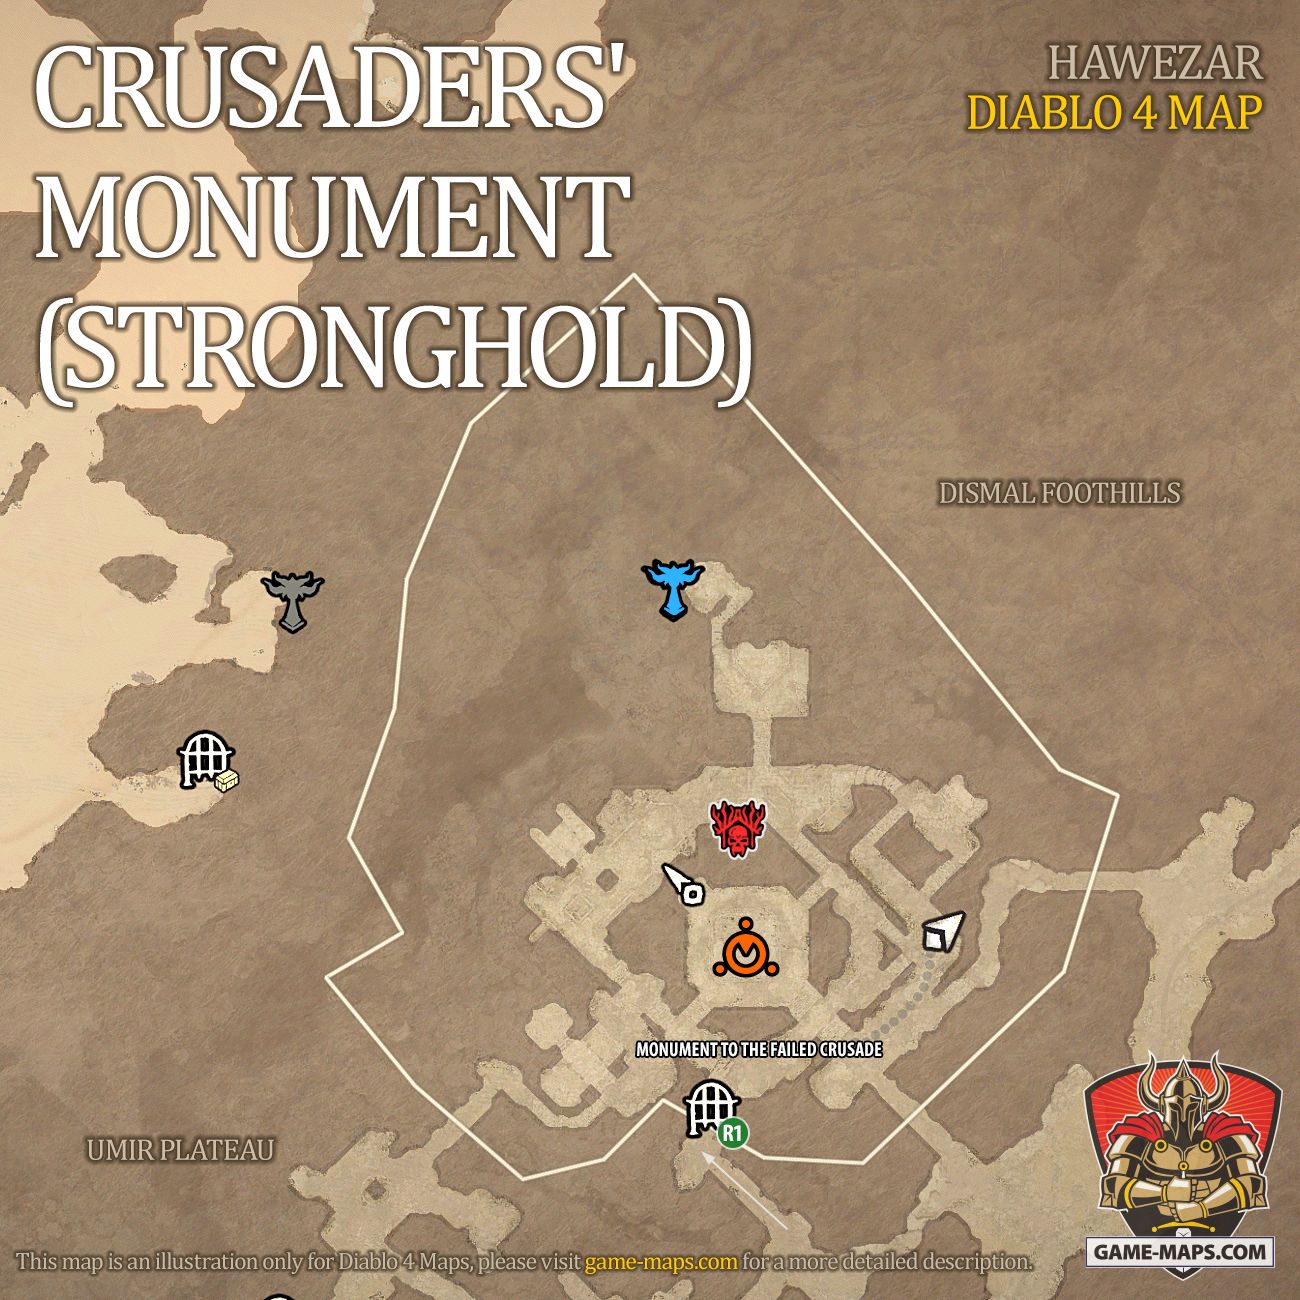 Crusaders' Monument Map (Stronghold) Diablo 4